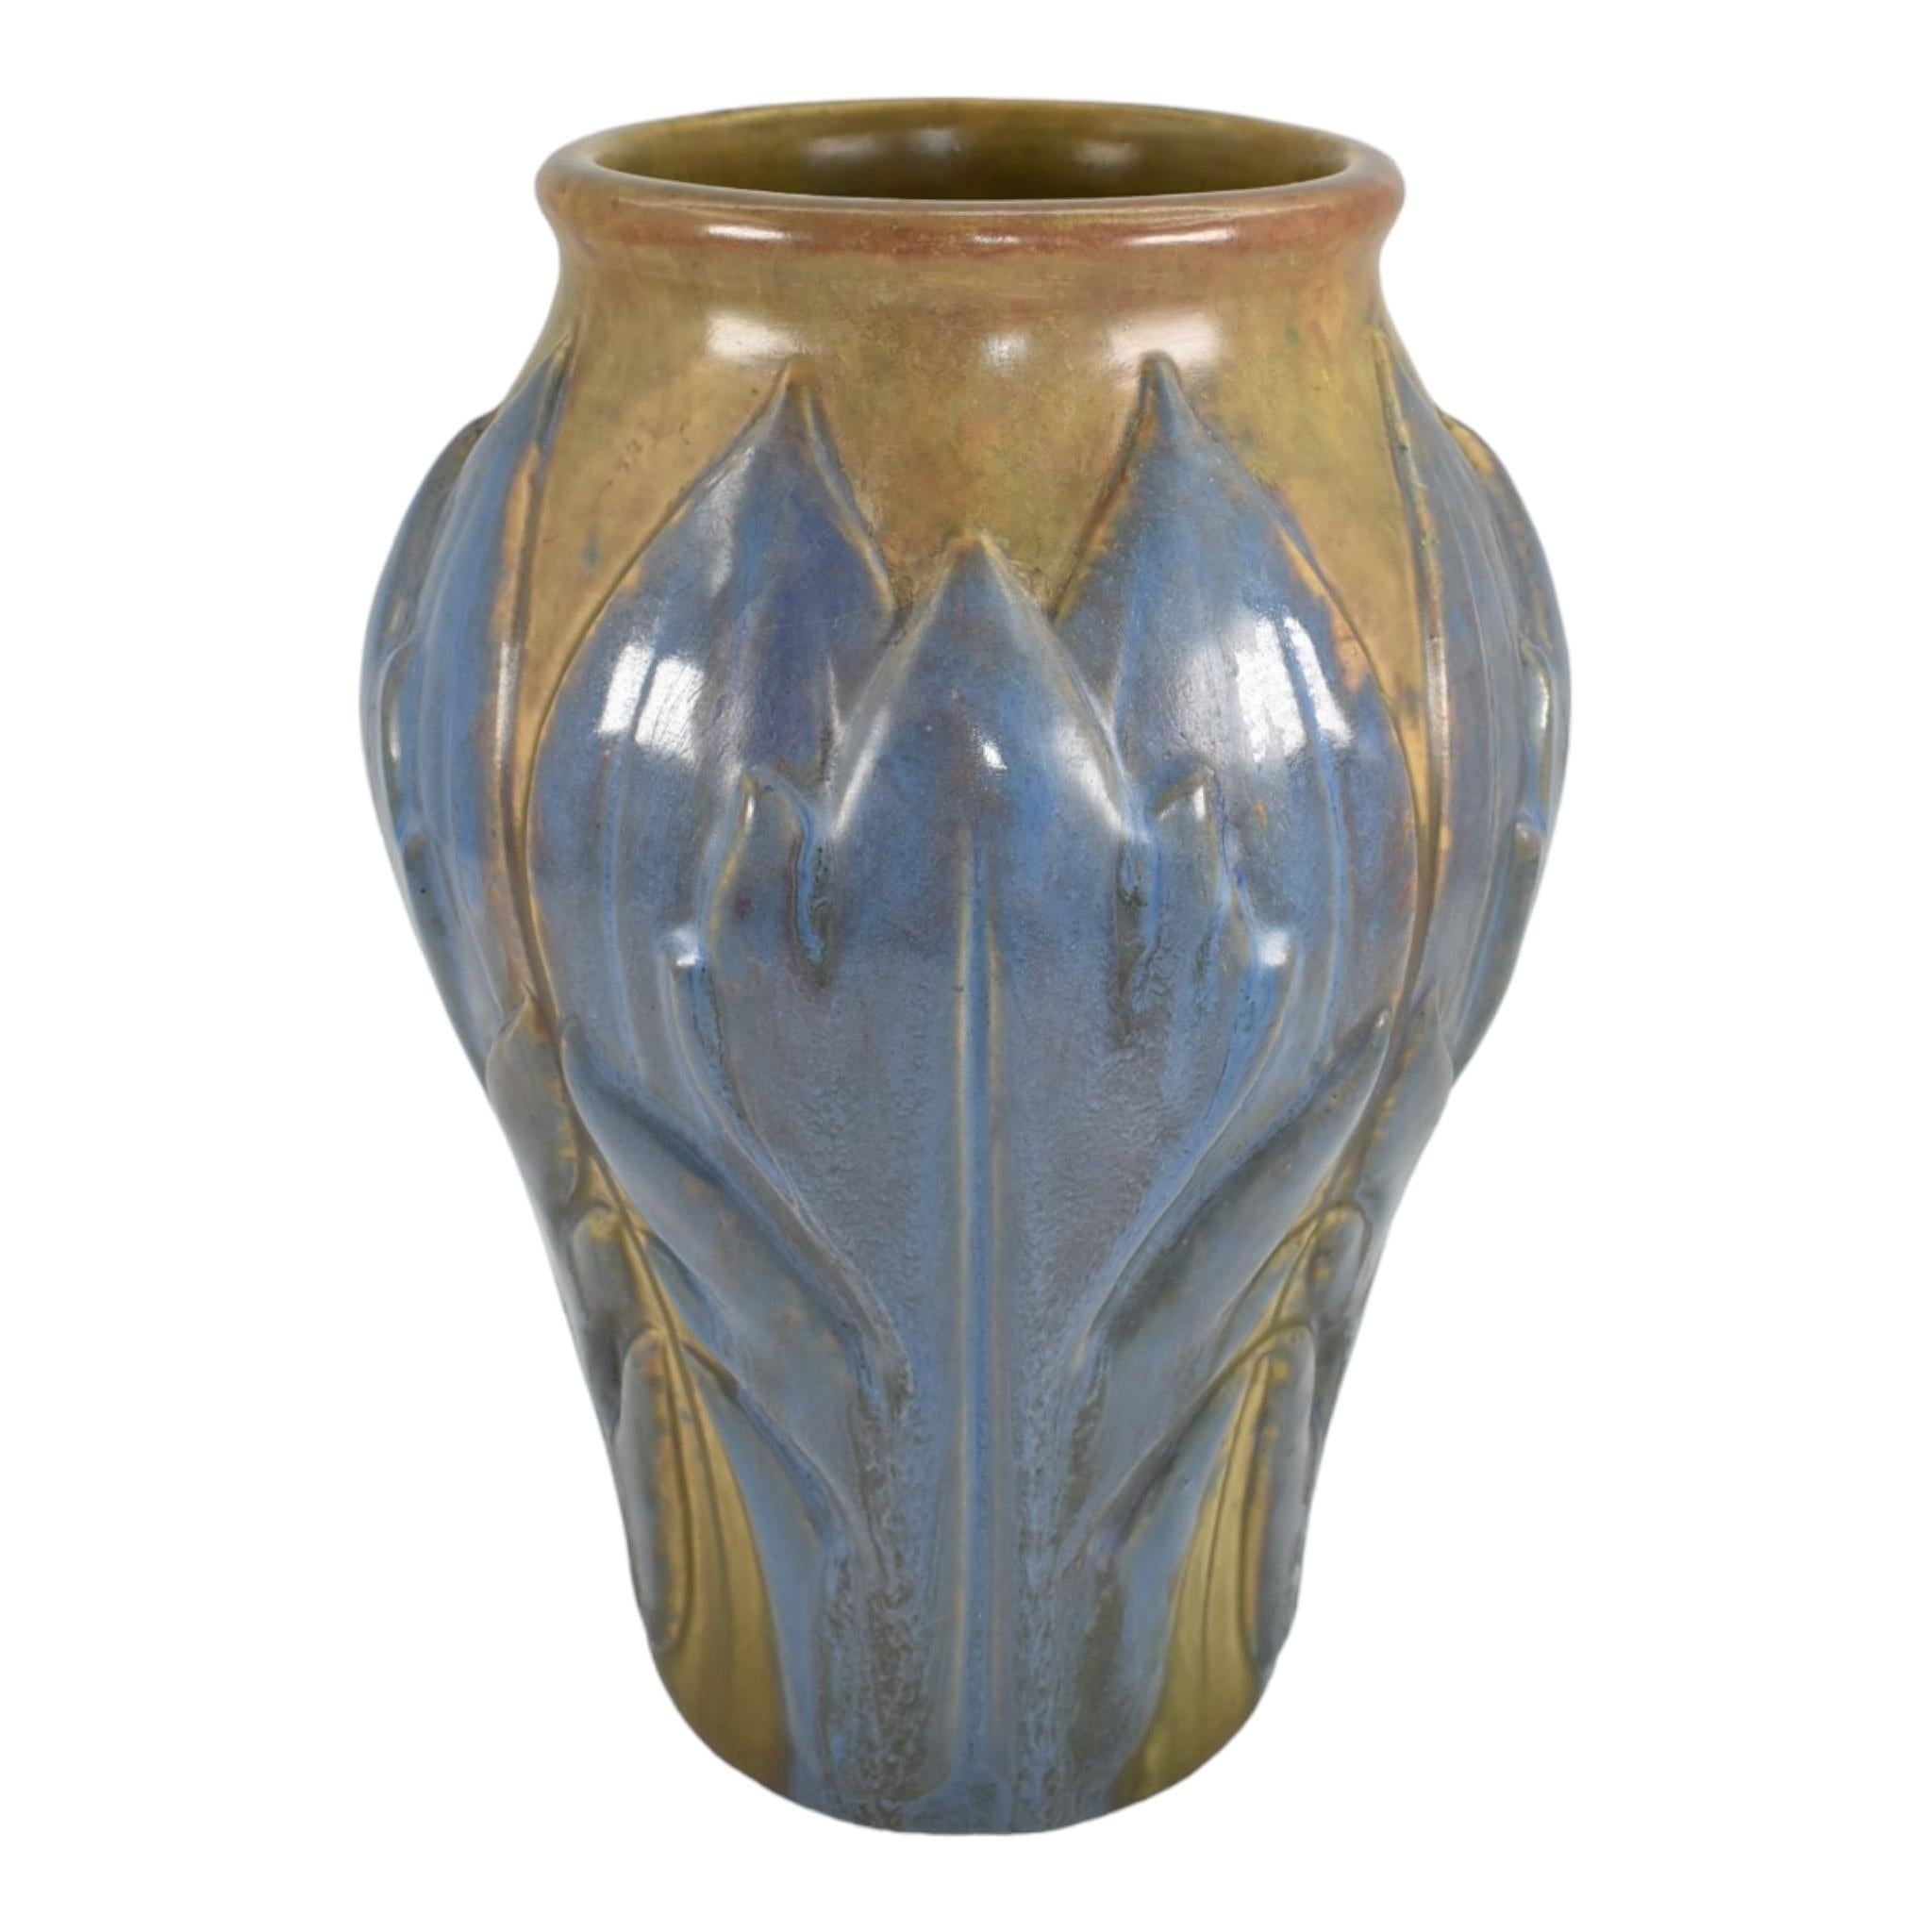 Roseville Early Velmoss Trial Glaze 1916 Vintage Art Pottery Ceramic Vase 135-10
Very rare trial glaze vase with high glaze blue/purple leaves and a green background.
Shows well with a repair to the inner rim. No other chips, cracks, damage or